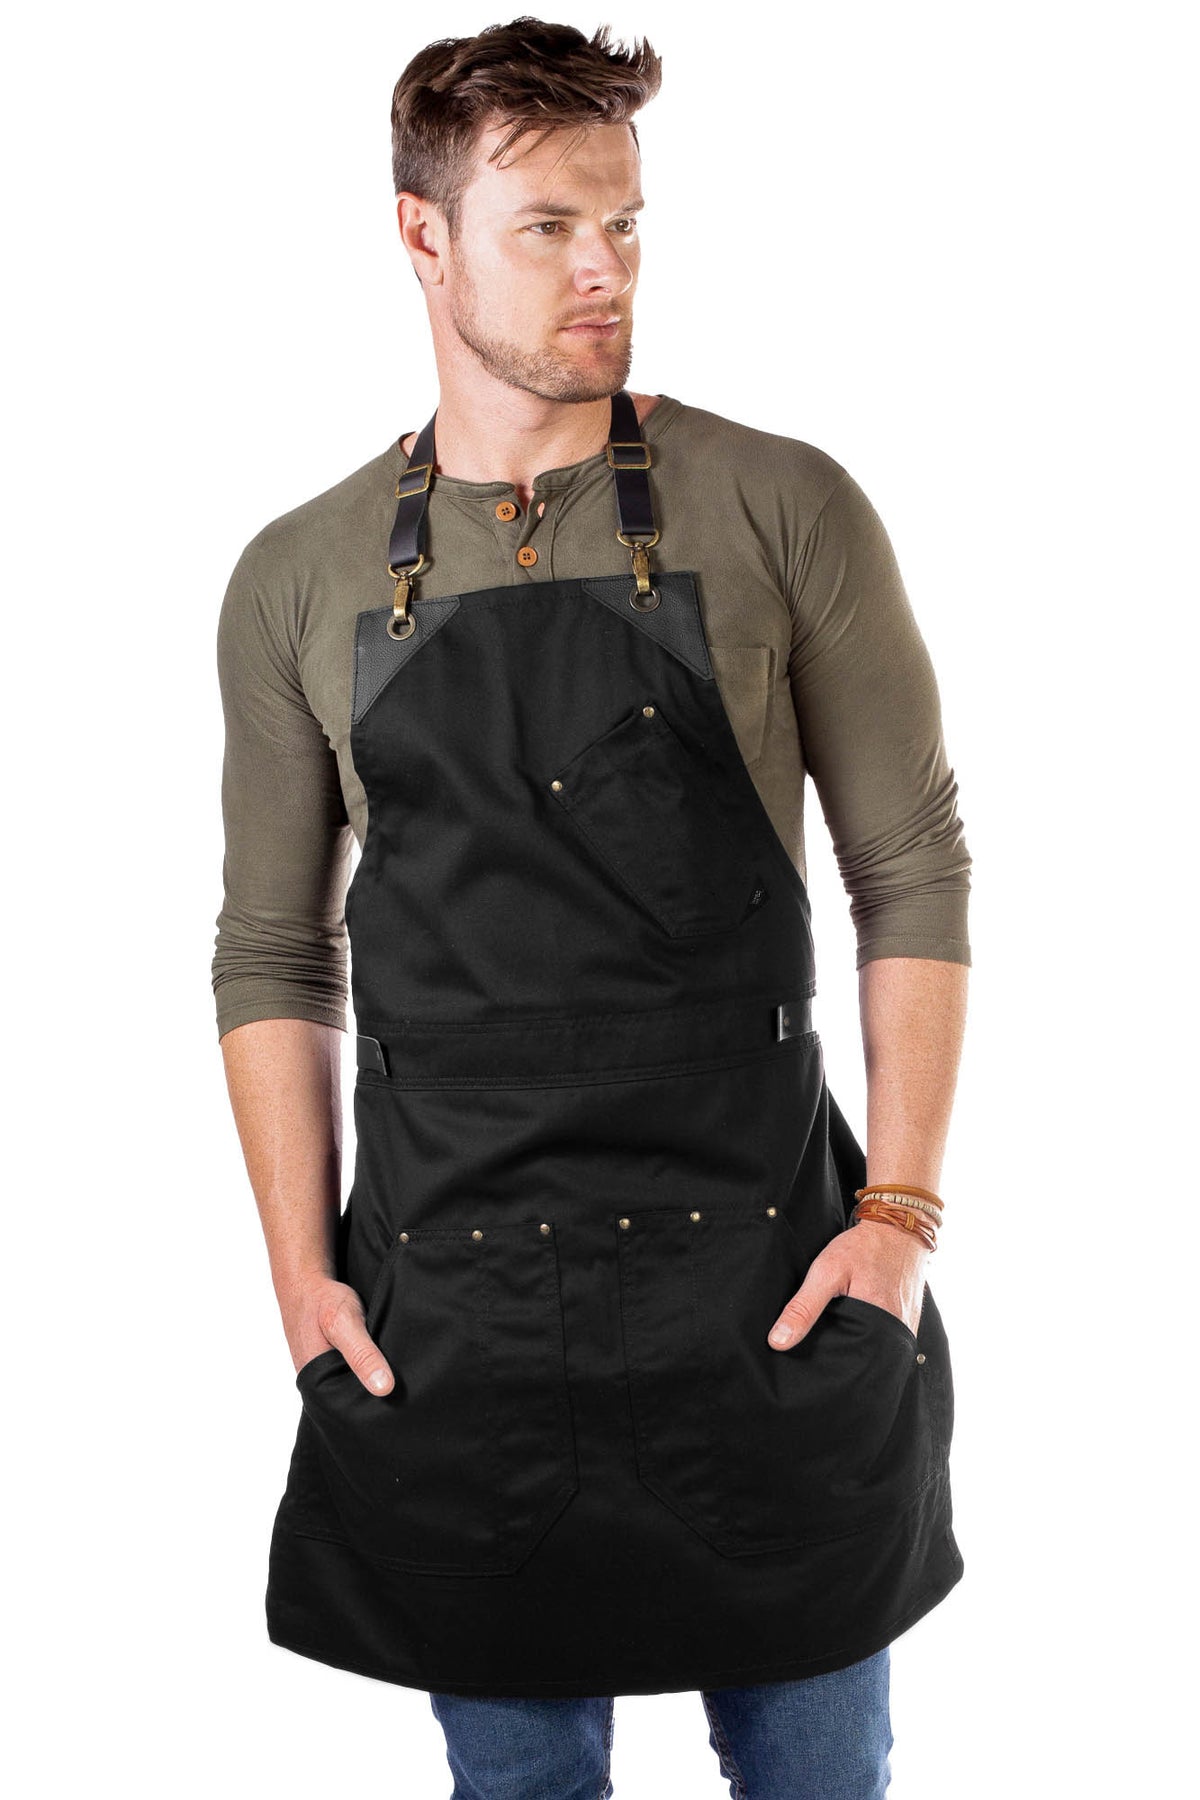 Barista Apron - Leather Straps &amp; Loops - Double Stitched  - Chef, Cook, Barista, Bartender - Under NY Sky